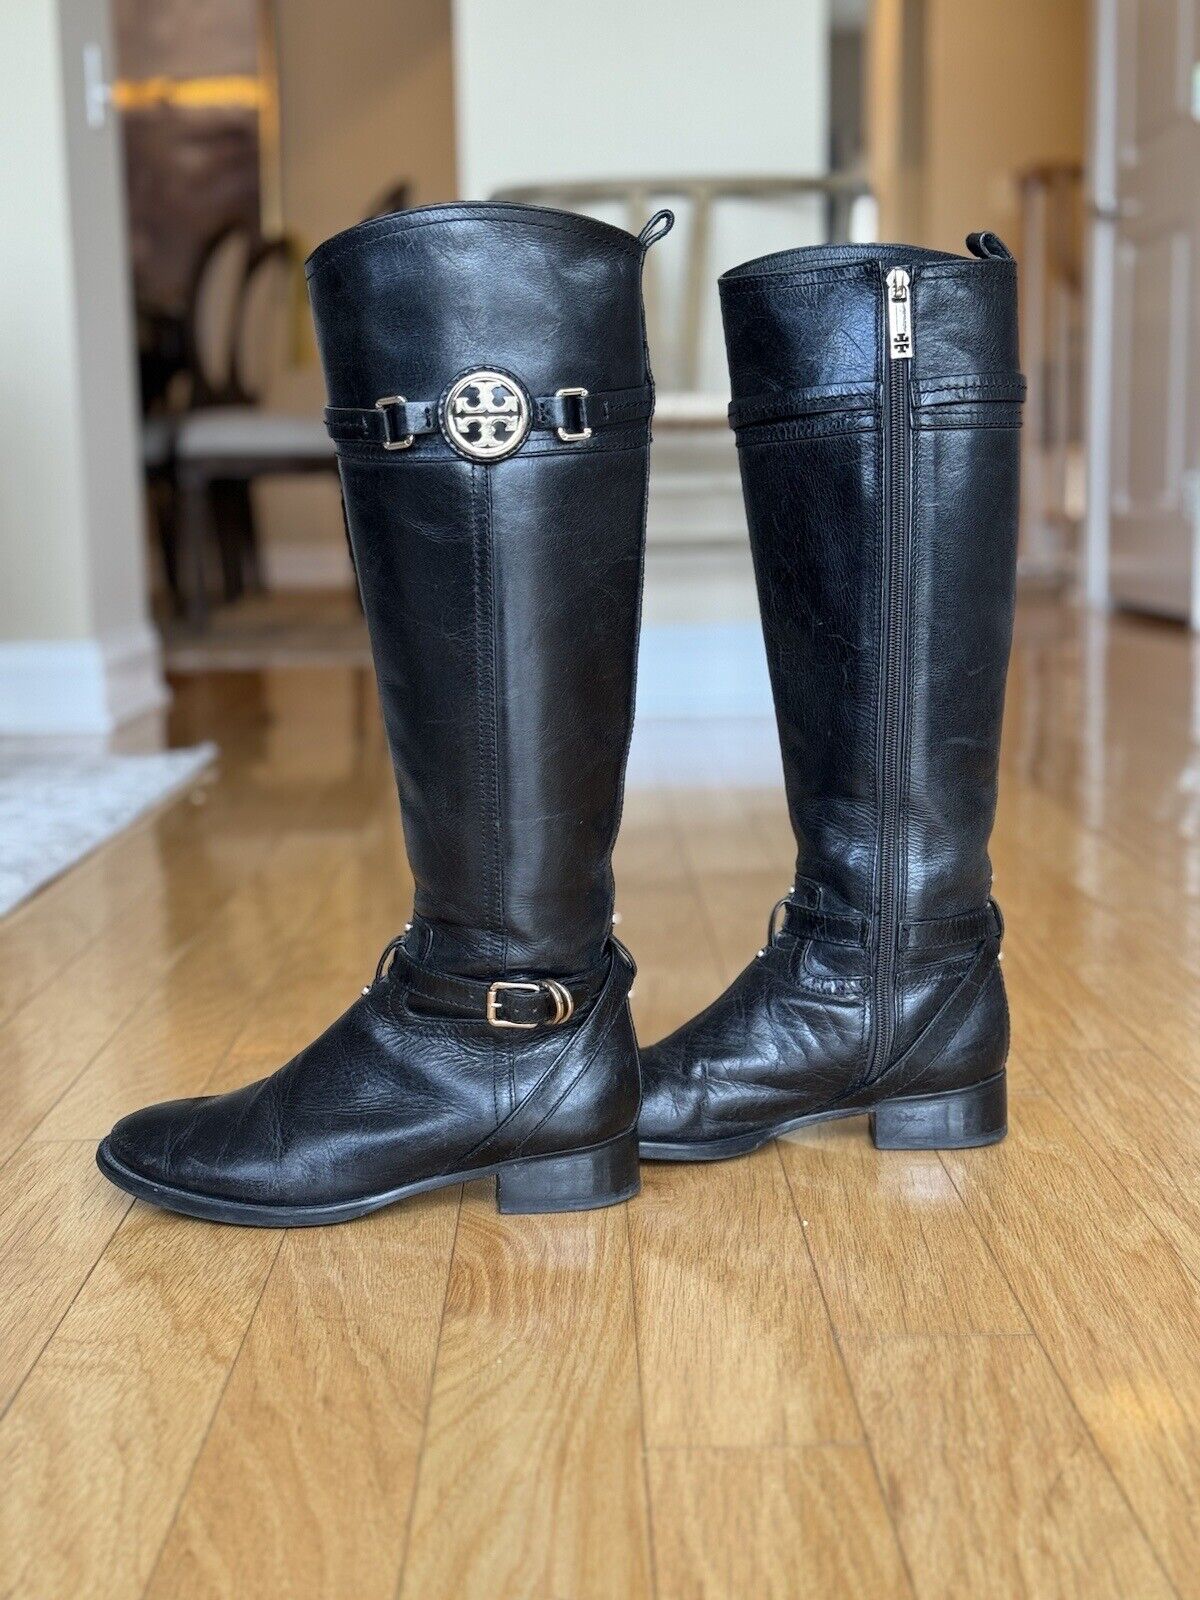 Tory Burch Black Calista Leather Riding Boot- 6.5 - image 3